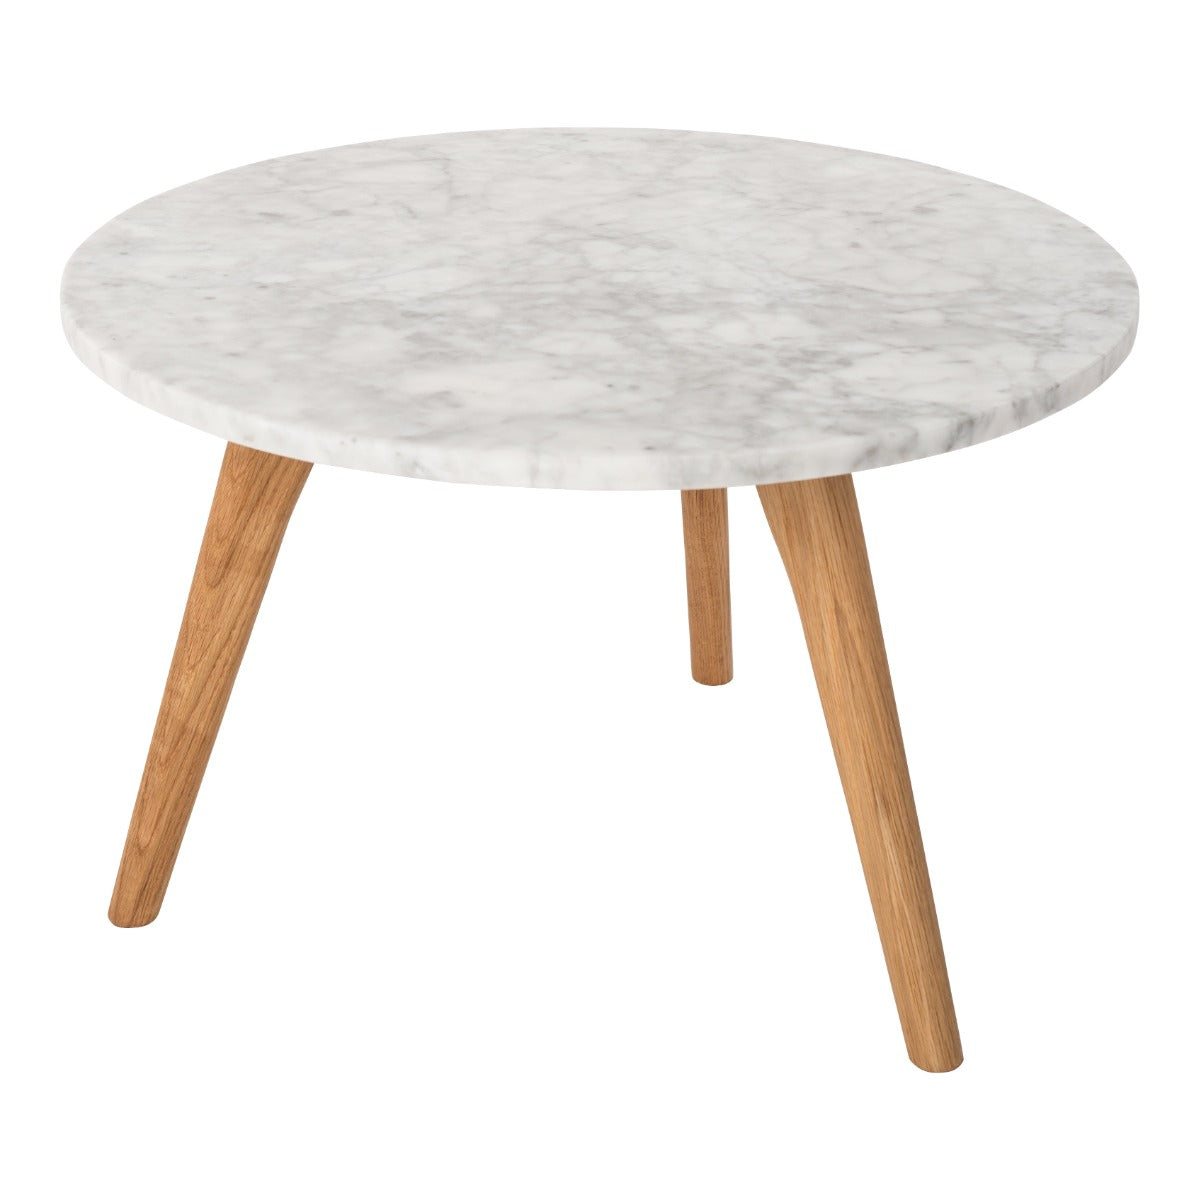 The Stone table is a timeless classic that is always in fashion. In its production, permanent, natural materials were focused. Top of the highest quality marble, and legs made of solid, varnished oak wood. In every modern living room, it will allow you to put tea or snacks for the film just before the sofa. You can also go out of the scheme with him and use it as a night table in a Scandinavian bedroom.